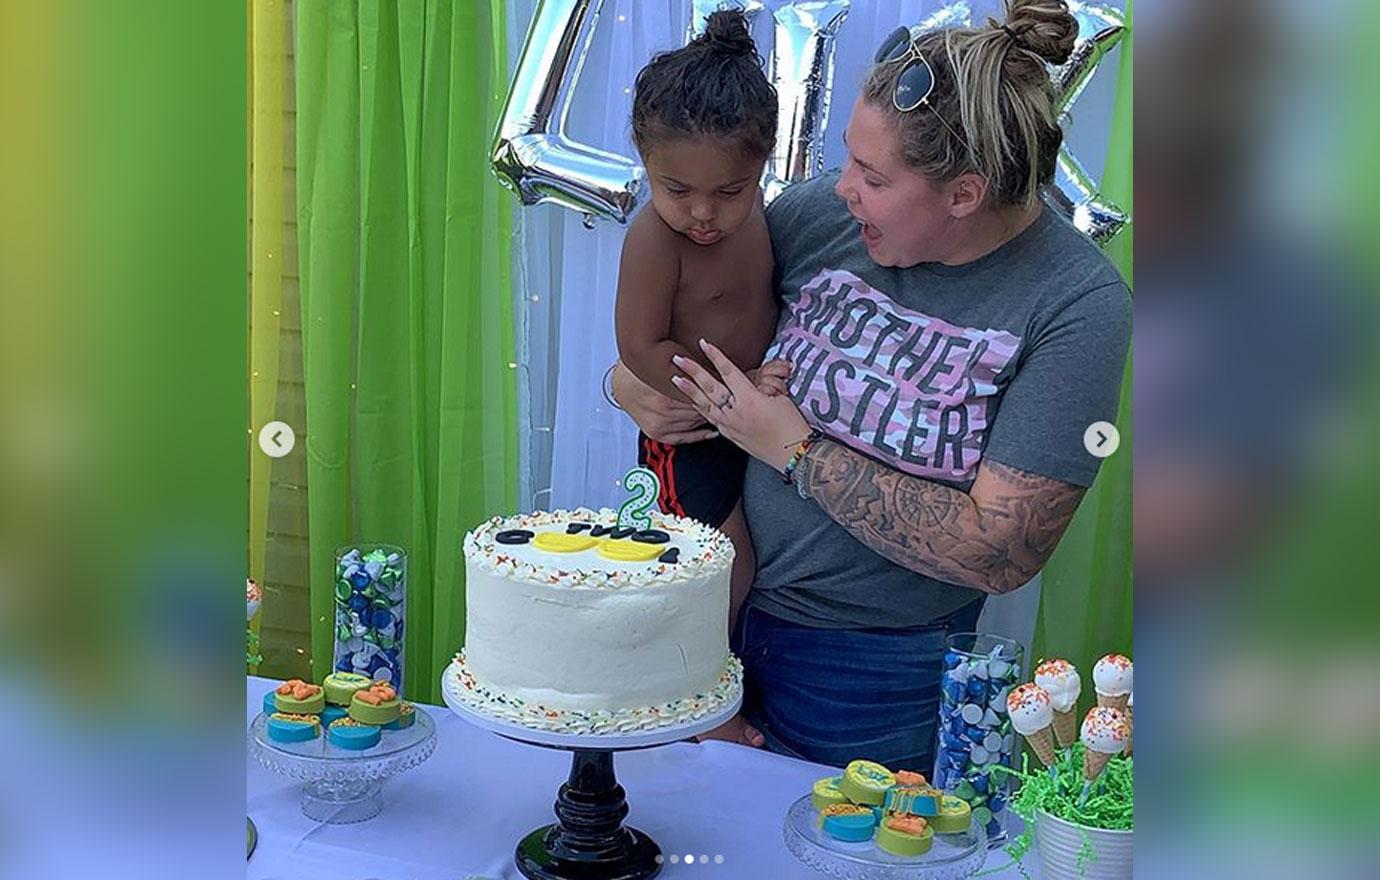 Teen Mom Kailyn Lowry's ex Chris Lopez shares rare photo of his blue-eyed  son Trew 'CJ' Christopher with new baby mama